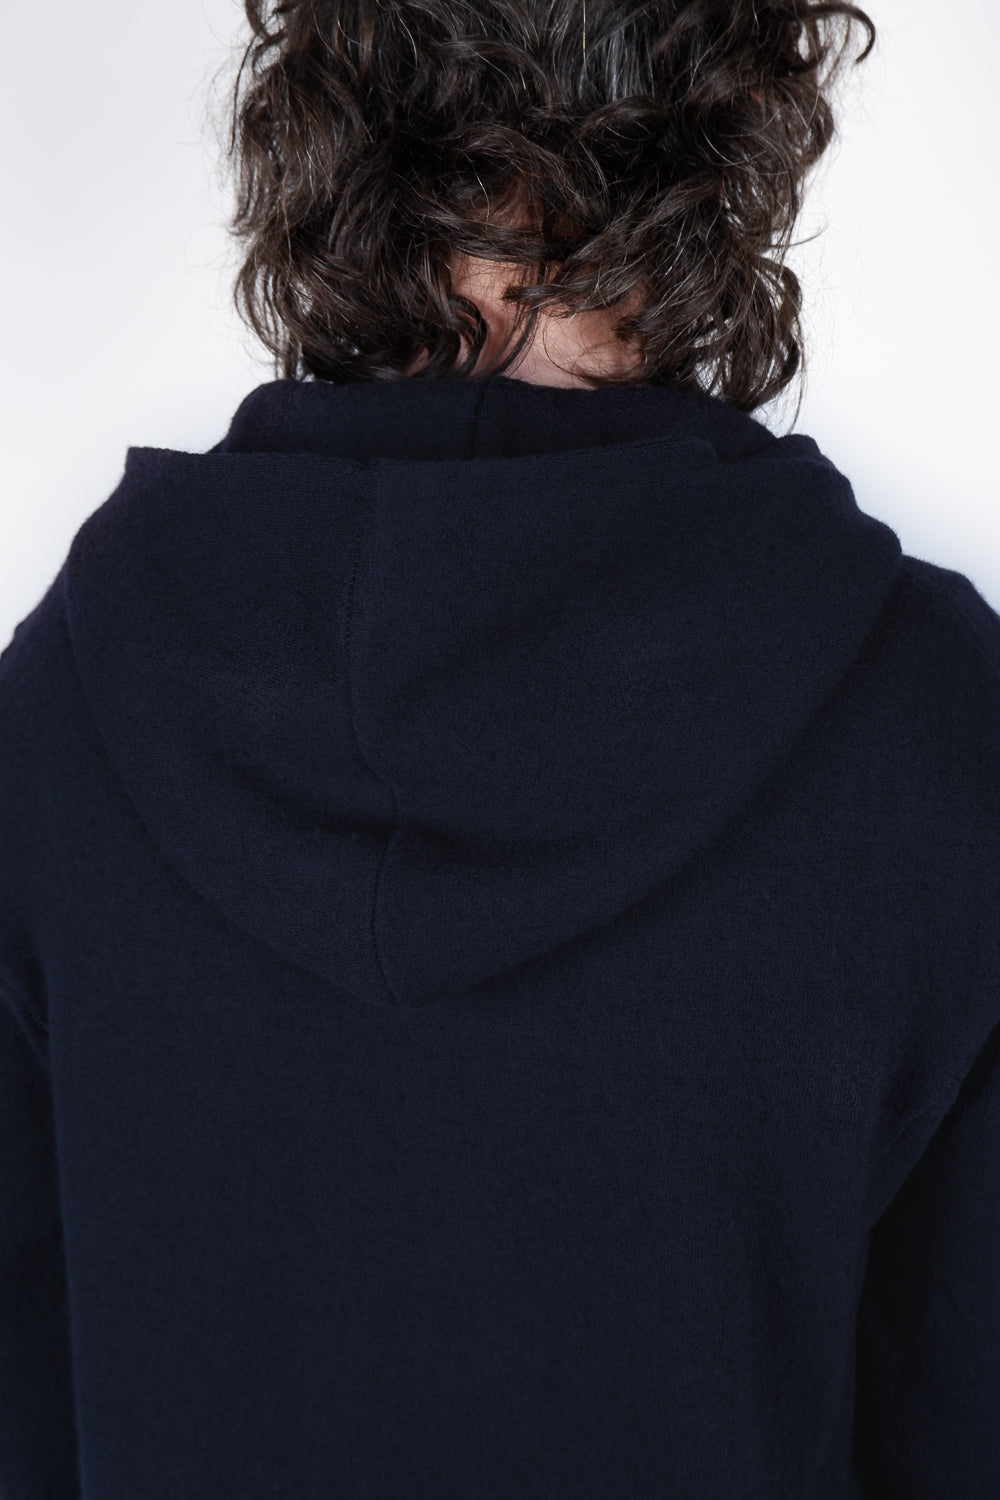 Buy the Hannes Roether Boiled Wool Hoodie Navy at Intro. Spend £50 for free UK delivery. Official stockists. We ship worldwide.